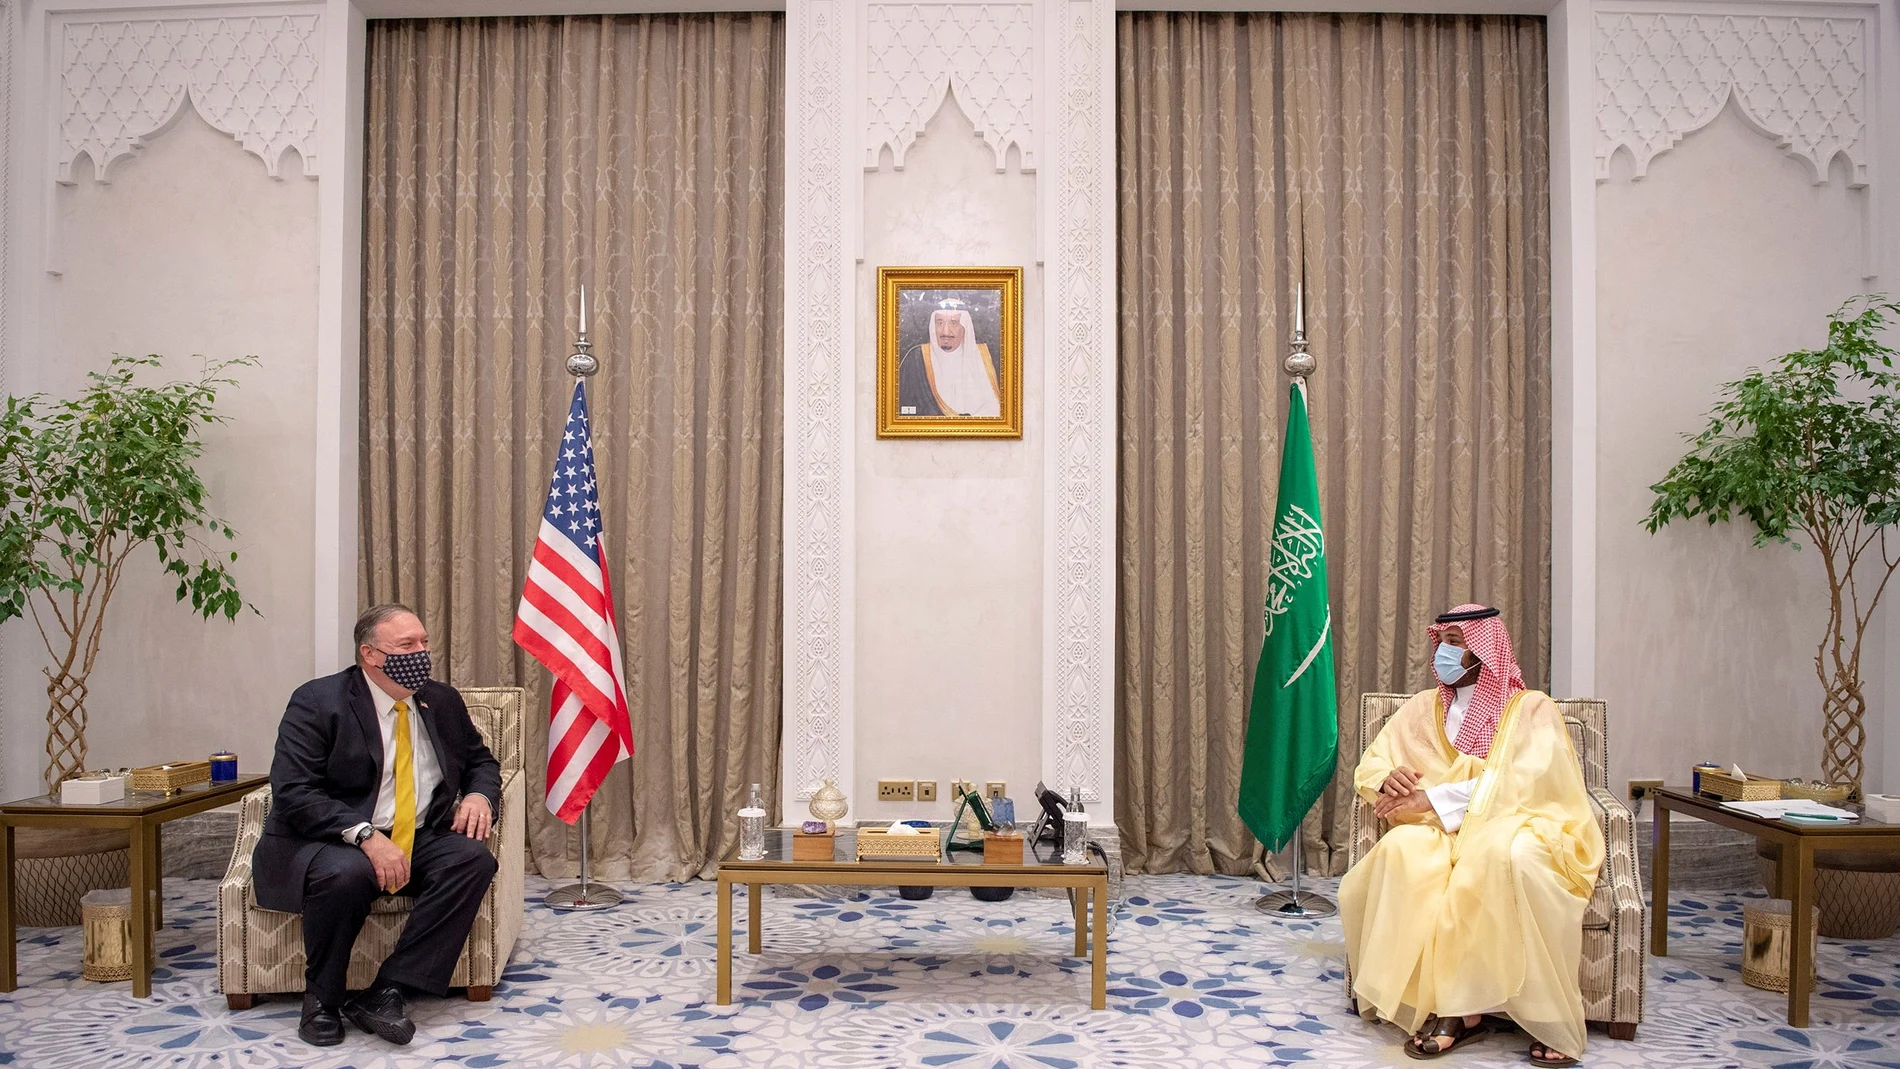 U.S. Secretary of State Mike Pompeo meets with Saudi Crown Prince Mohammed bin Salman during his visit to the country, in Riyadh, Saudi Arabia, November 22, 2020. Picture taken November 22, 2020. Bandar Algaloud/Courtesy of Saudi Royal Court/Handout via REUTERS ATTENTION EDITORS - THIS PICTURE WAS PROVIDED BY A THIRD PARTY